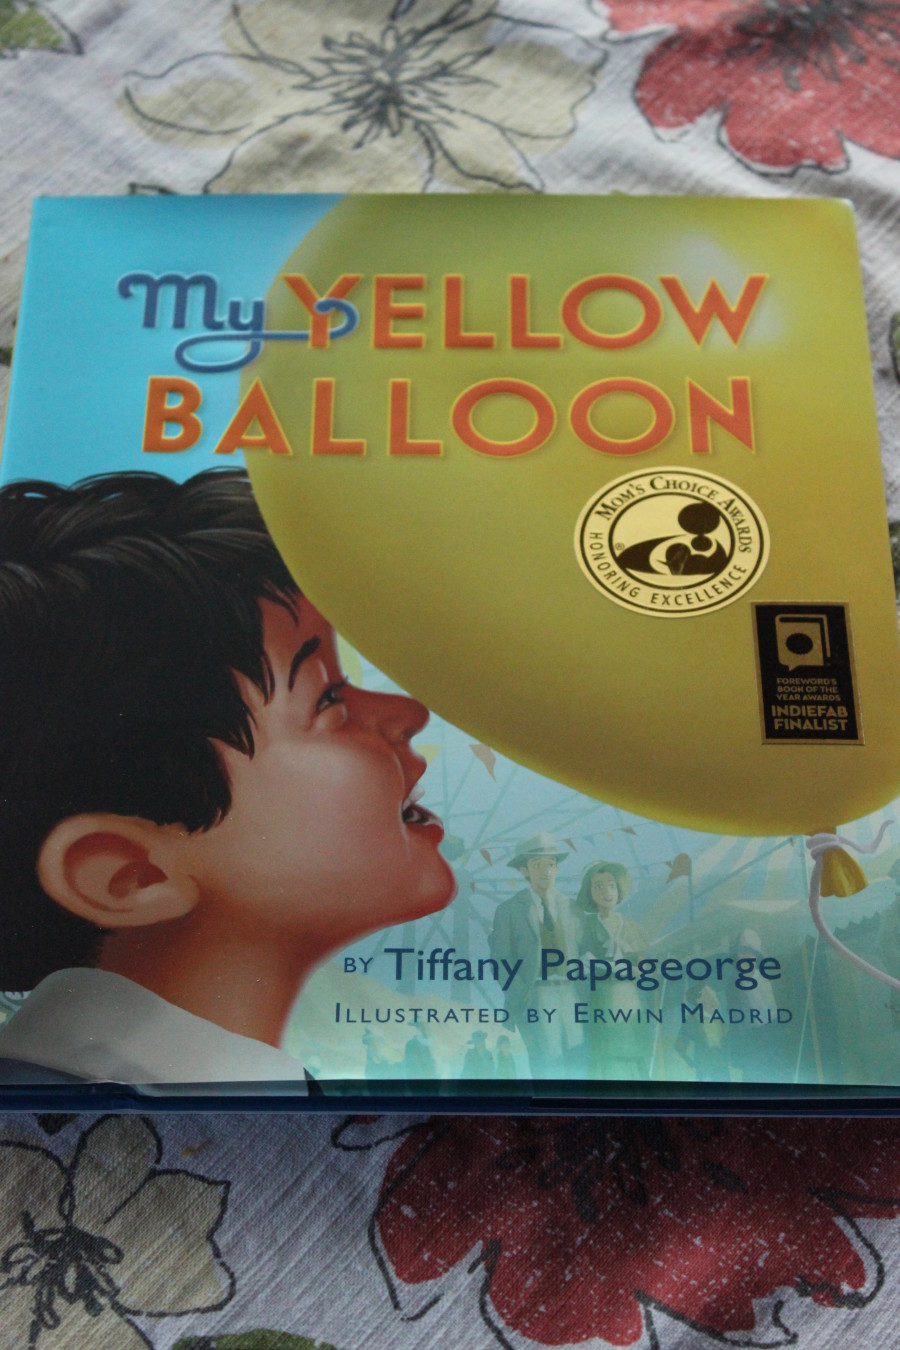 My Yellow Balloon by Tiffany Papageorge